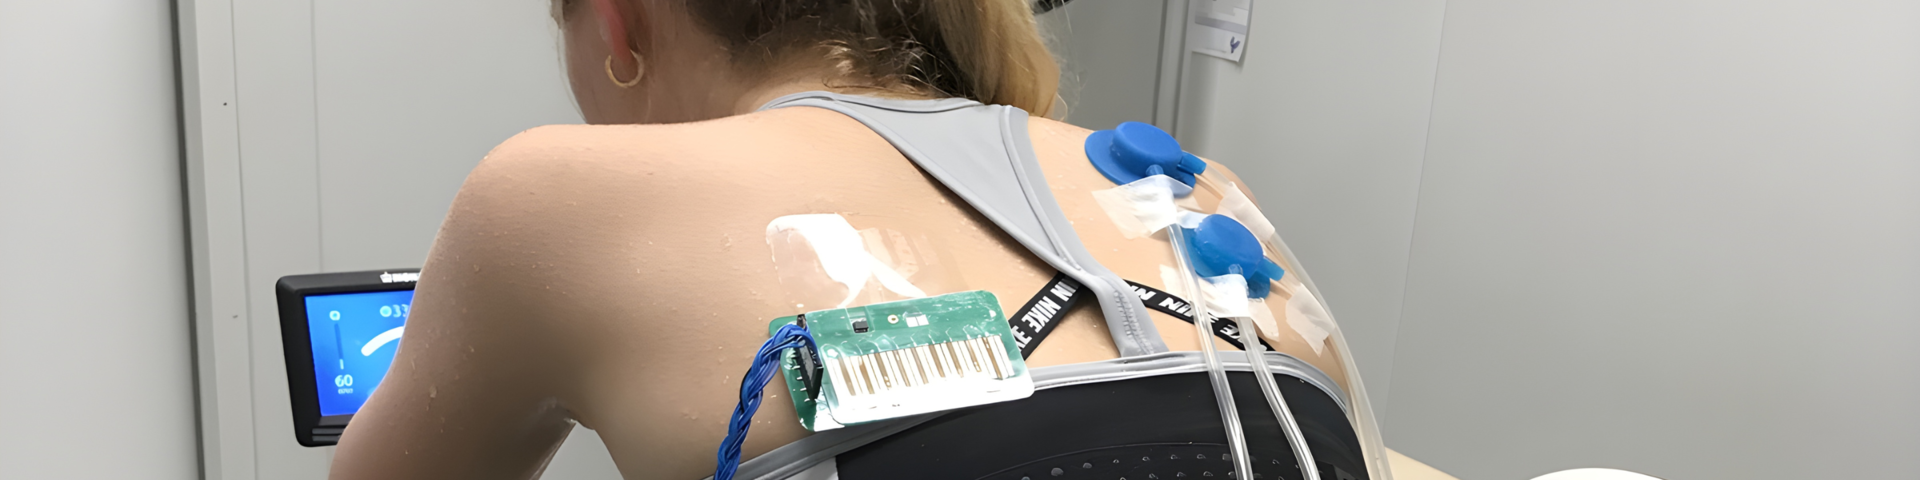 Using sensors to stop sports injuries before they start